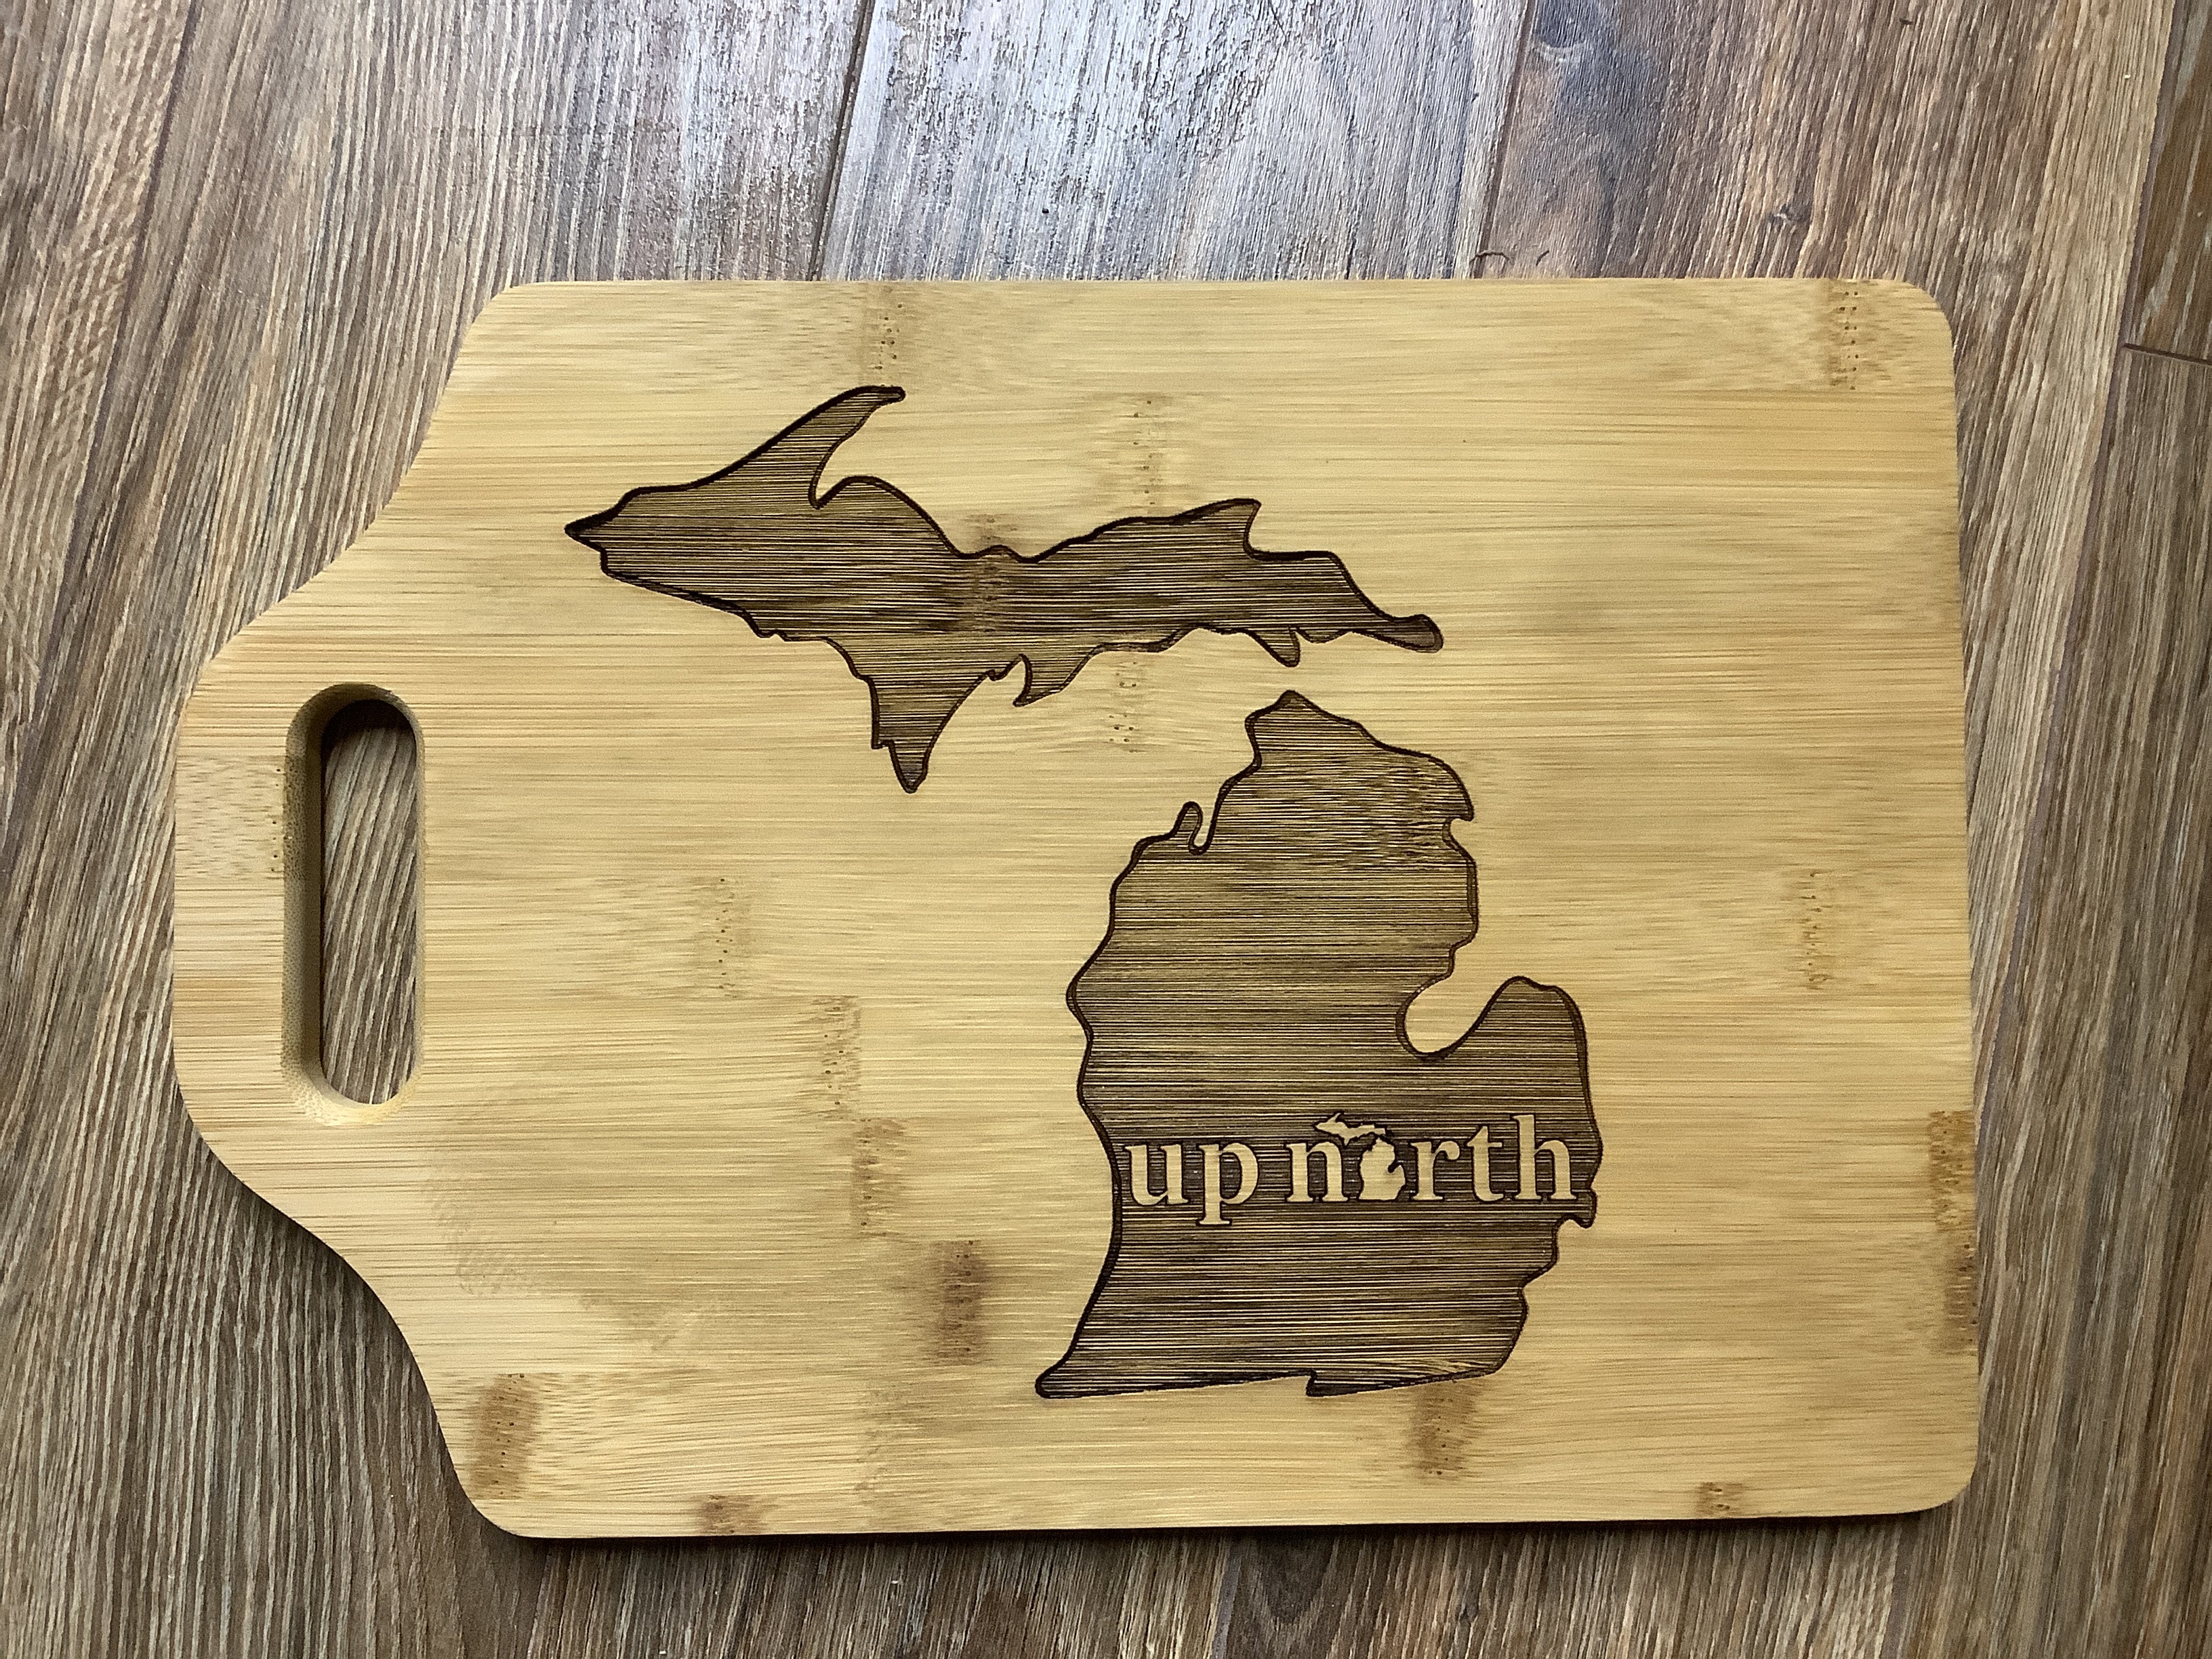 Up North Michigan - Wooden Engraved - Cutting Board